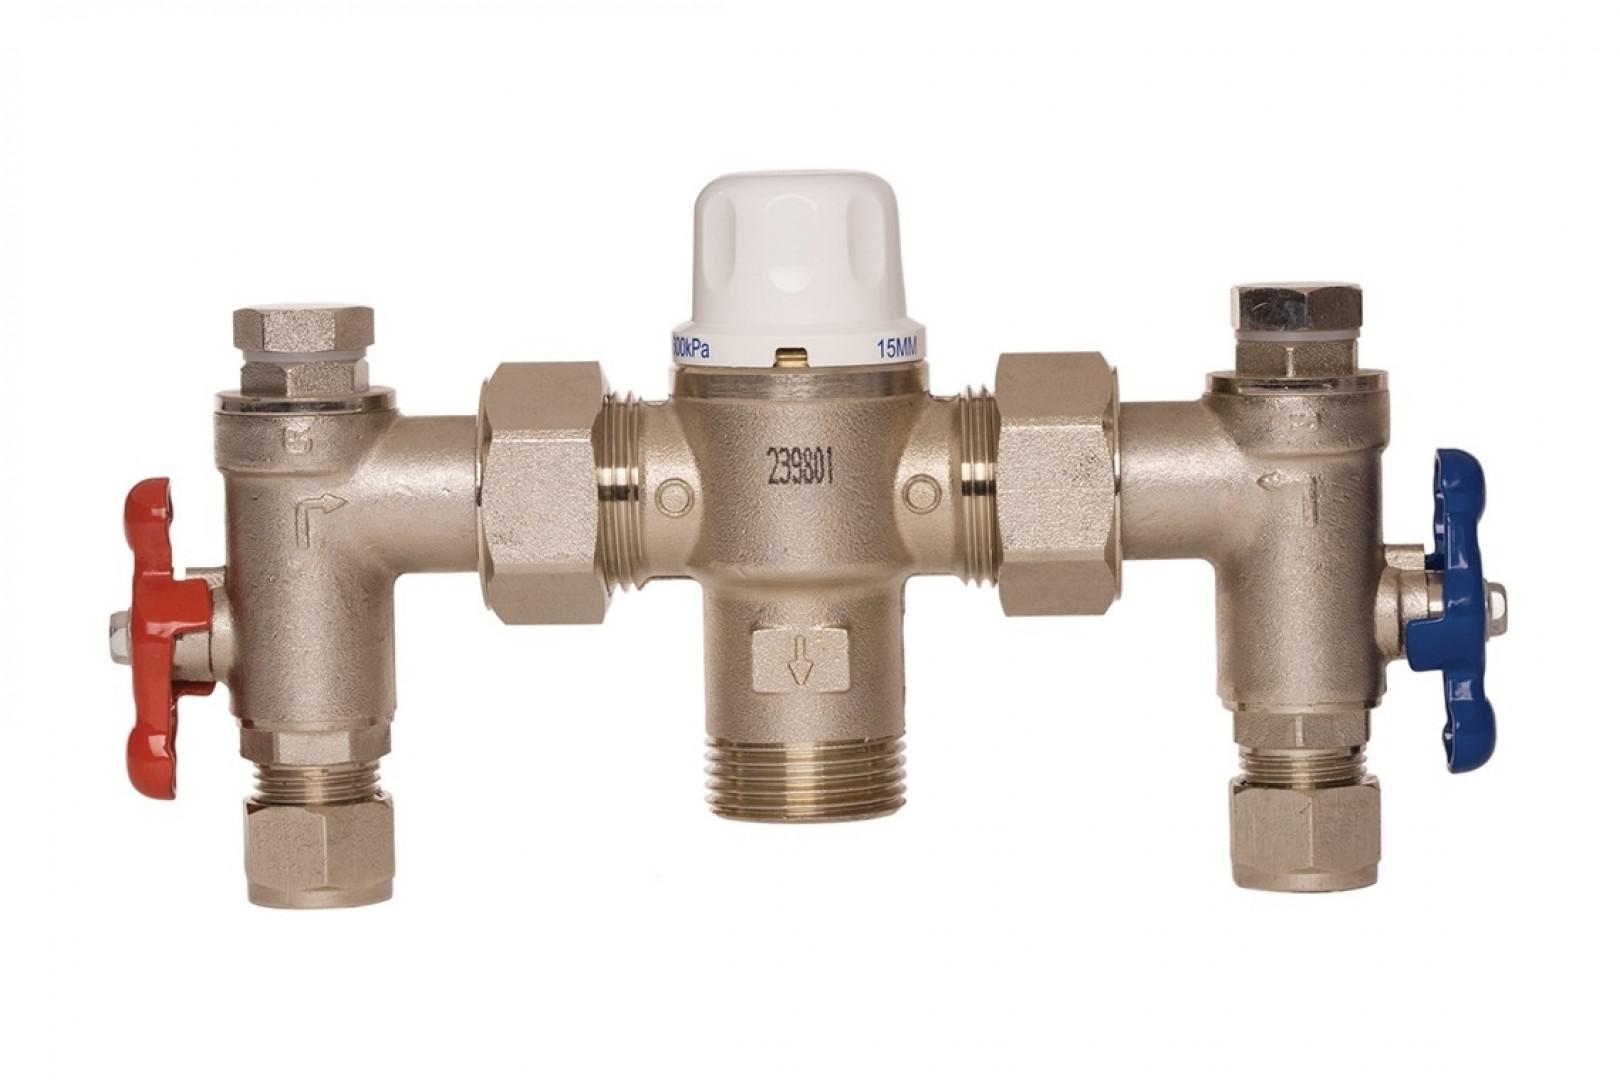 Aquablend 1000 Thermostatic Mixing Valve - Atm710 from Enware